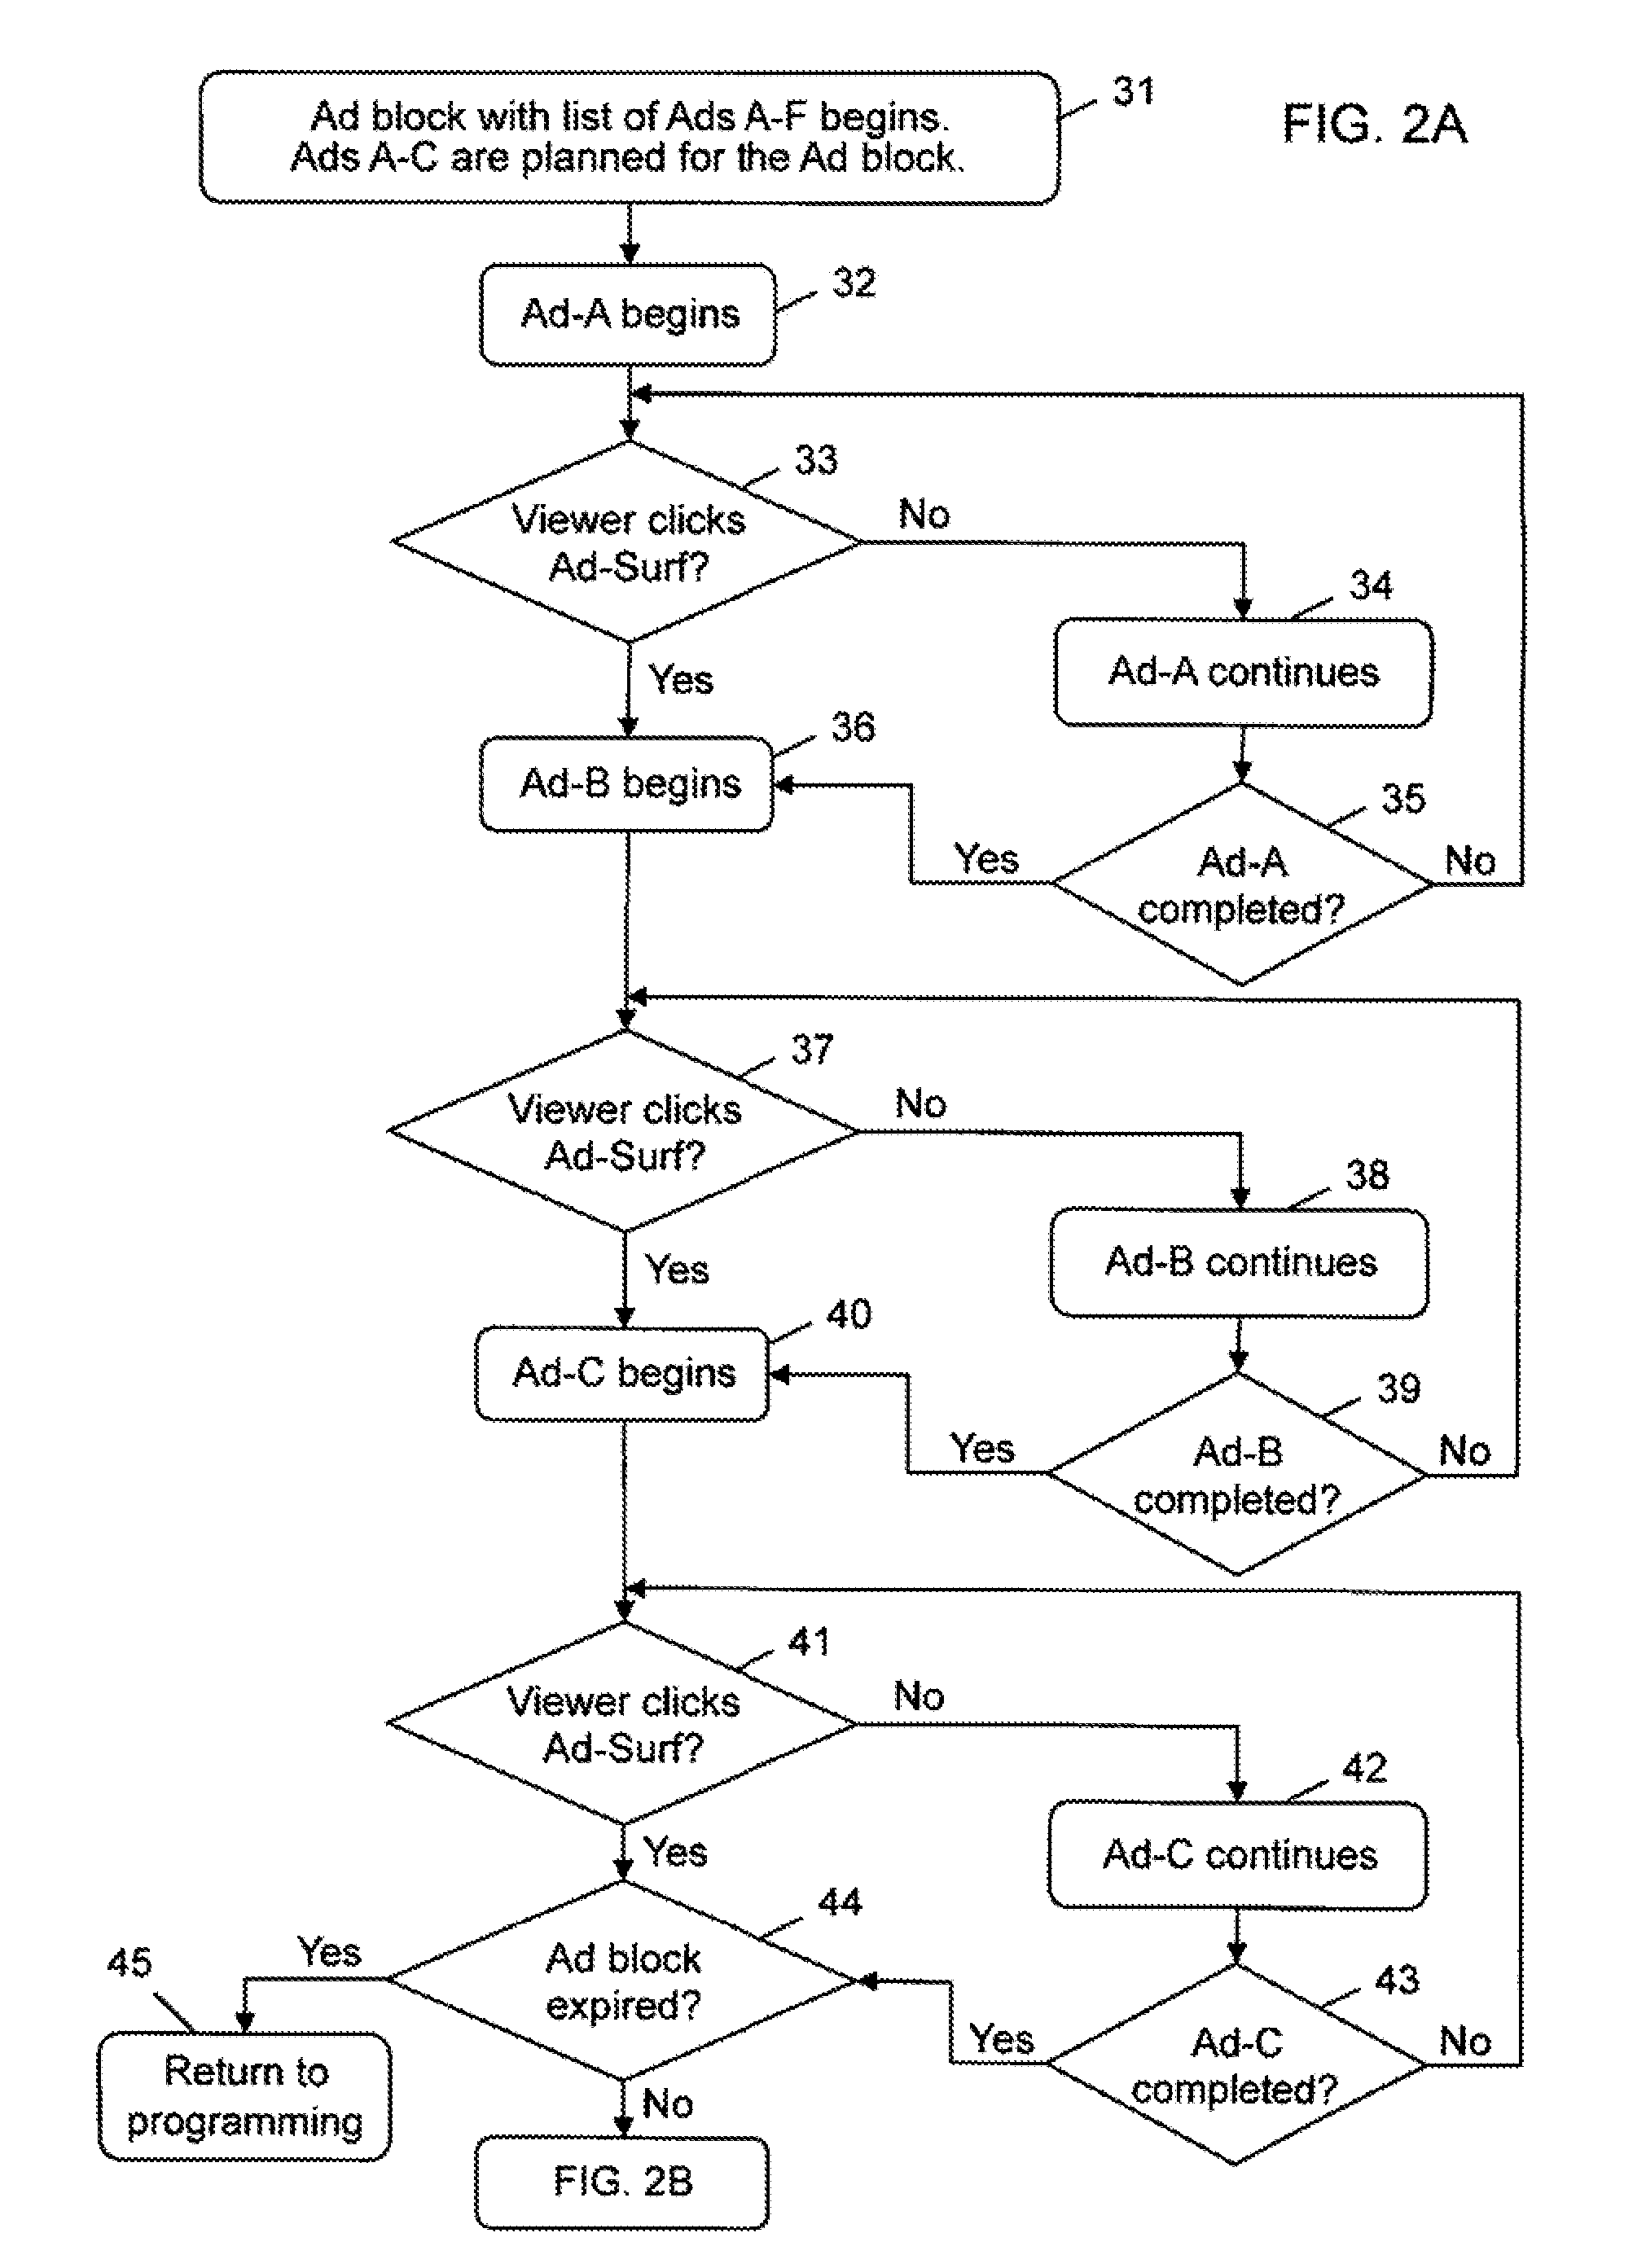 System and method enabling viewers to select between a plurality of scheduled advertisements